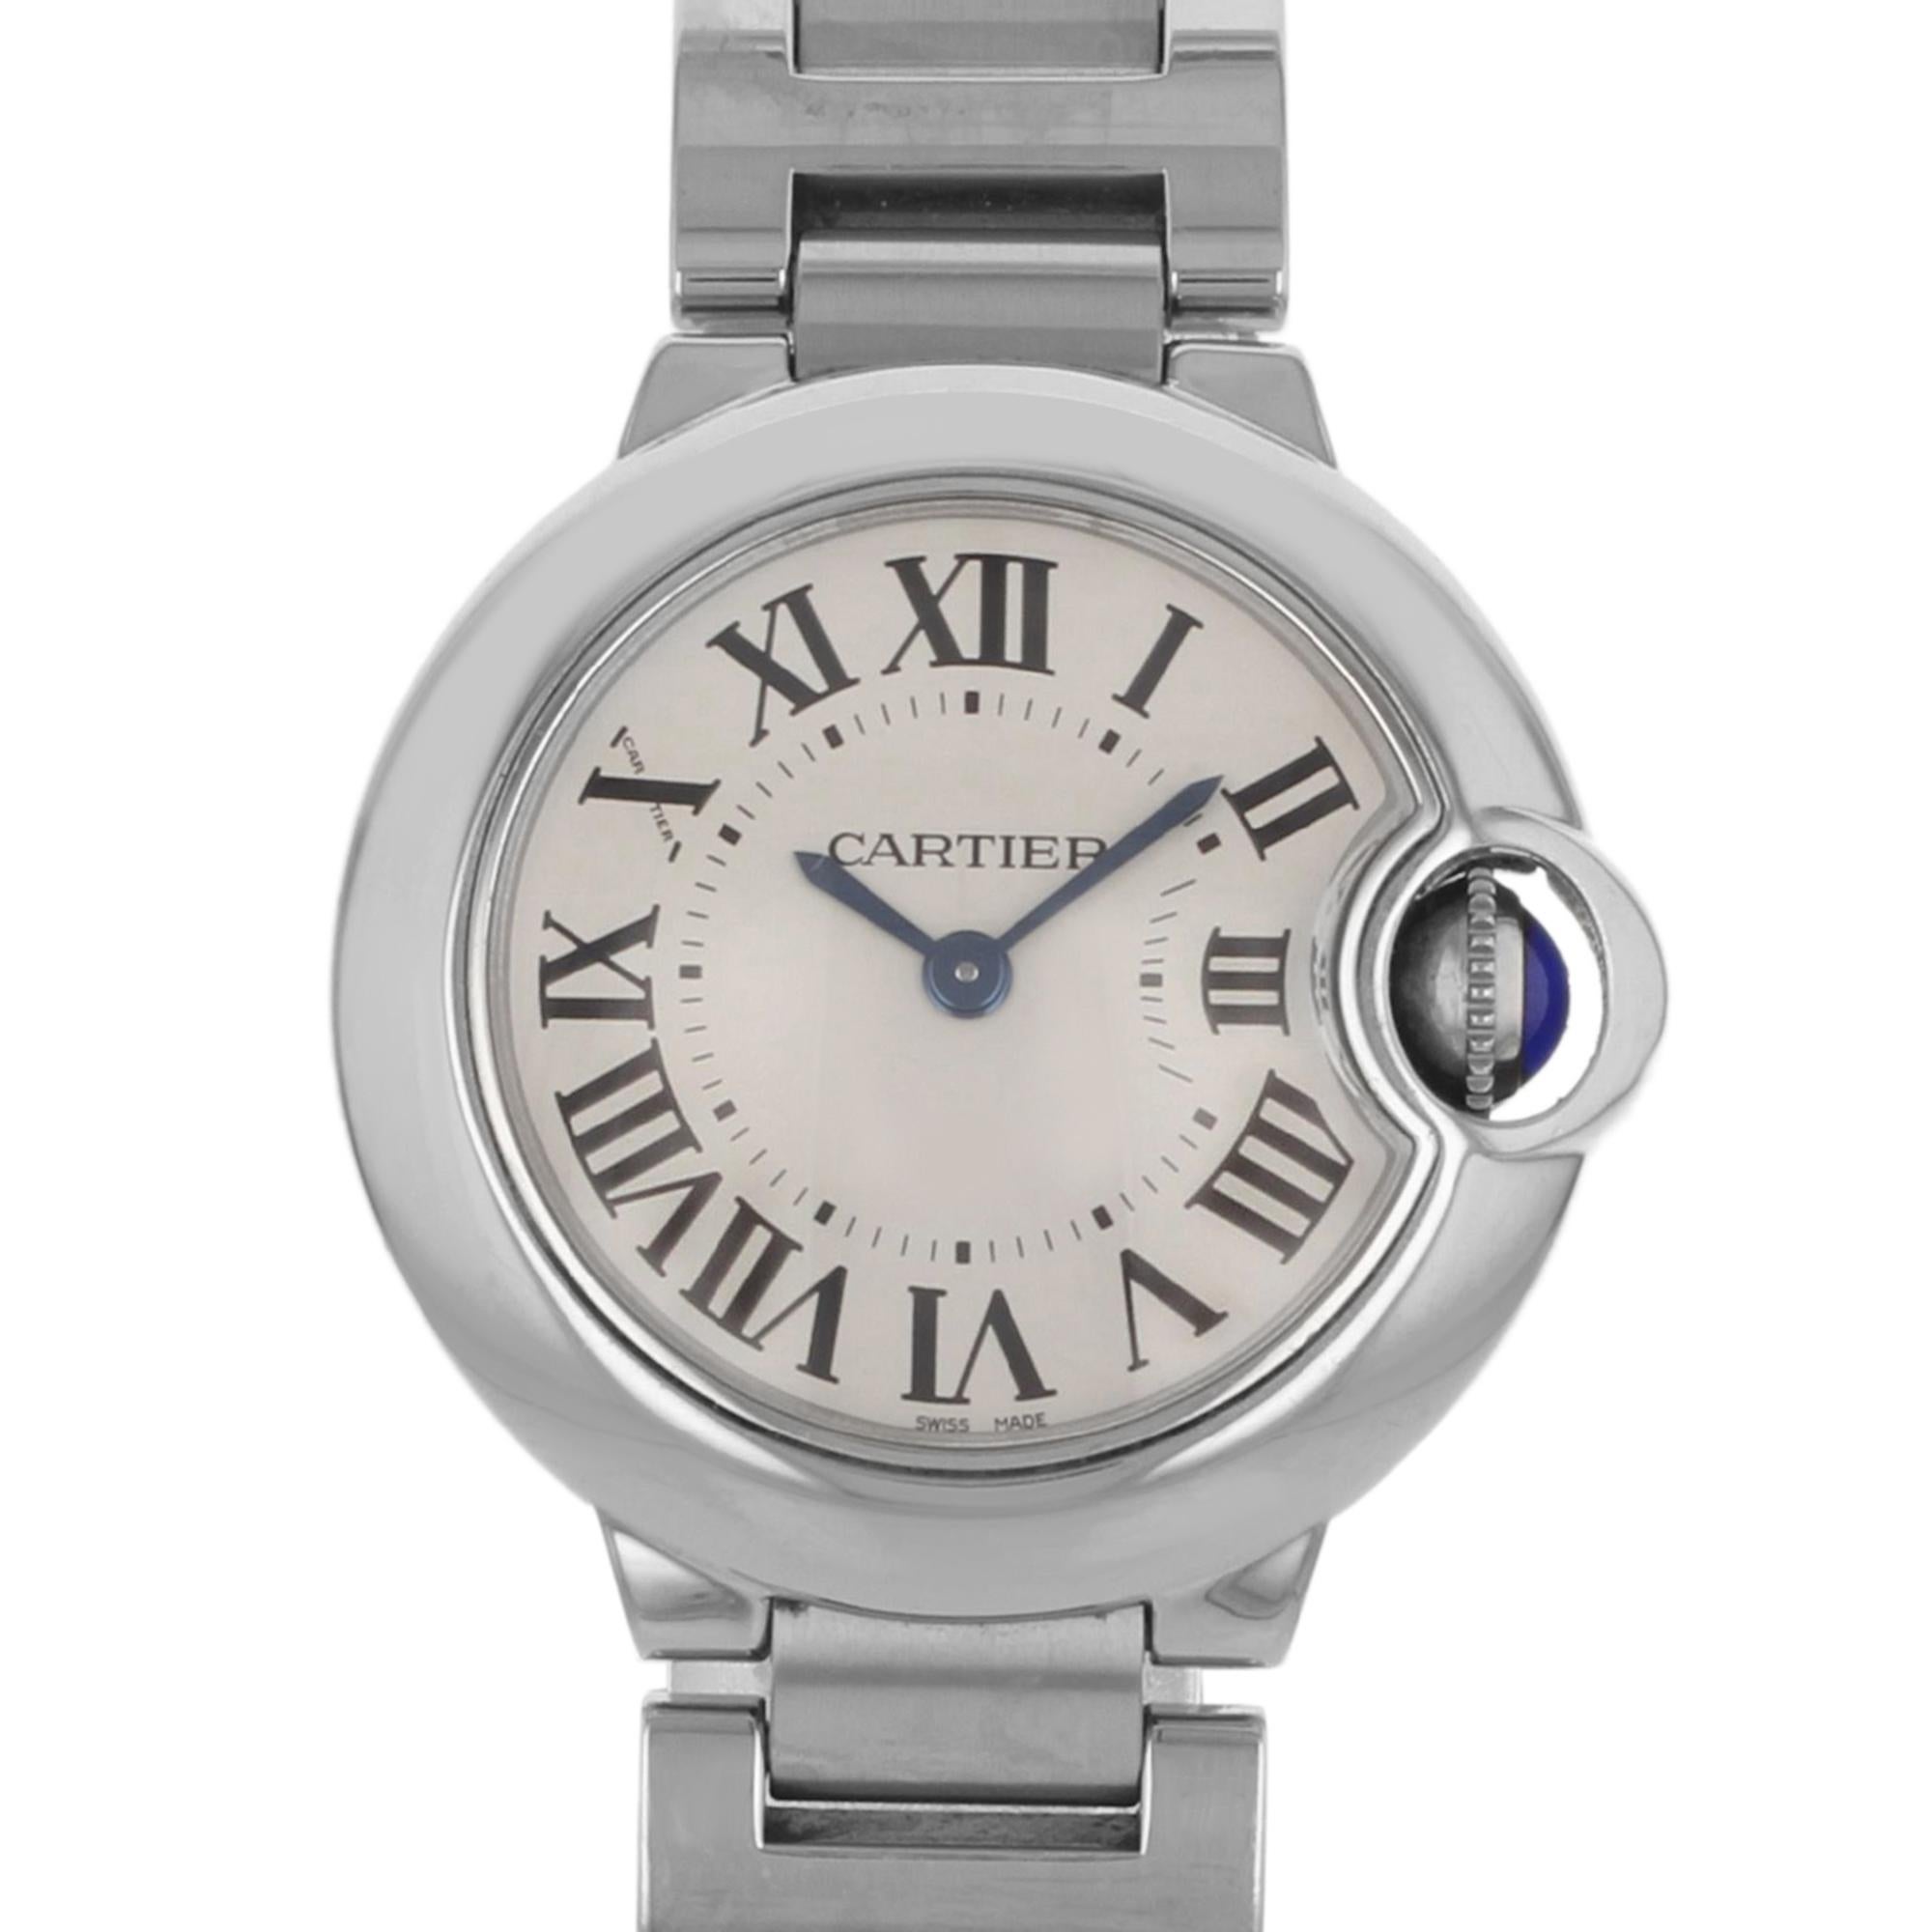 This  never been worn  Cartier Ballon Bleu W69010Z4 is a beautiful men's timepiece that is powered by quartz (battery) movement which is cased in a stainless steel case. It has a round shape face, no features dial and has hand roman numerals style